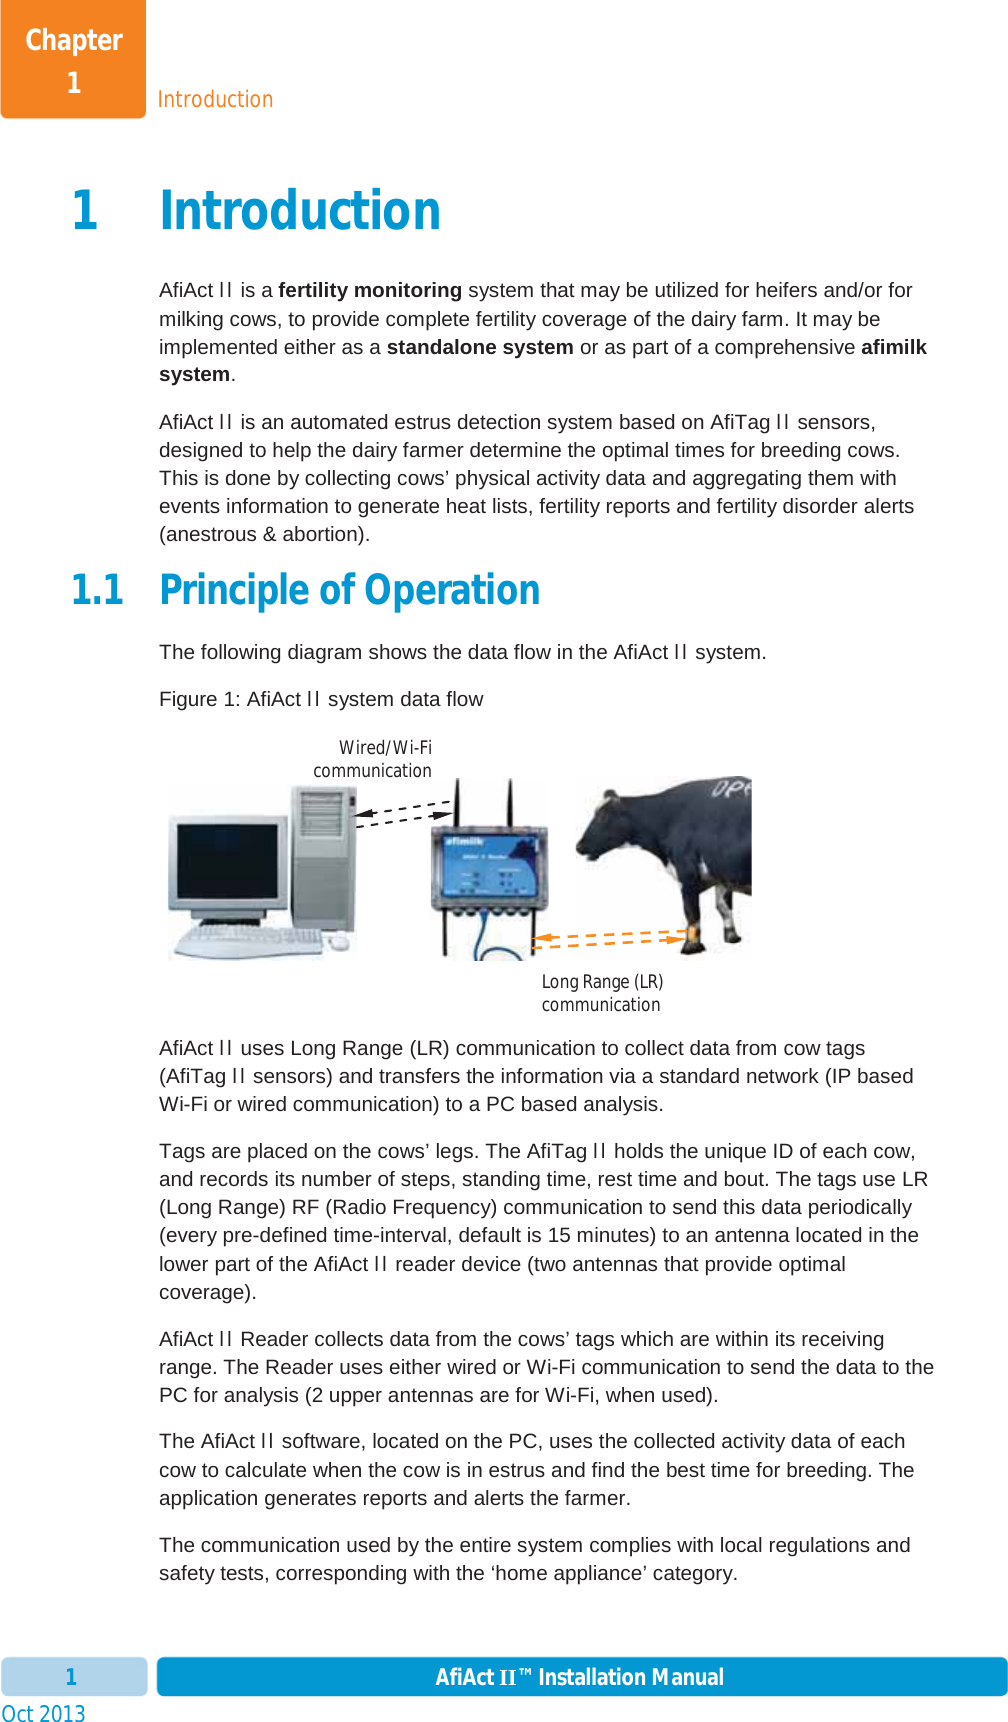 IntroductionChapter 1Oct 2013 AfiAct II™ Installation Manual11 IntroductionAfiAct II is a fertility monitoring system that may be utilized for heifers and/or for milking cows, to provide complete fertility coverage of the dairy farm. It may be implemented either as a standalone system or as part of a comprehensive afimilk system.AfiAct II is an automated estrus detection system based on AfiTag II sensors, designed to help the dairy farmer determine the optimal times for breeding cows. This is done by collecting cows’ physical activity data and aggregating them with events information to generate heat lists, fertility reports and fertility disorder alerts (anestrous &amp; abortion).   1.1 Principle of Operation The following diagram shows the data flow in the AfiAct II system. Figure 1: AfiAct II system data flow                      AfiAct II uses Long Range (LR) communication to collect data from cow tags (AfiTag II sensors) and transfers the information via a standard network (IP based Wi-Fi or wired communication) to a PC based analysis.Tags are placed on the cows’ legs. The AfiTag II holds the unique ID of each cow, and records its number of steps, standing time, rest time and bout. The tags use LR (Long Range) RF (Radio Frequency) communication to send this data periodically (every pre-defined time-interval, default is 15 minutes) to an antenna located in the lower part of the AfiAct II reader device (two antennas that provide optimal coverage).AfiAct II Reader collects data from the cows’ tags which are within its receiving range. The Reader uses either wired or Wi-Fi communication to send the data to the PC for analysis (2 upper antennas are for Wi-Fi, when used). The AfiAct II software, located on the PC, uses the collected activity data of each cow to calculate when the cow is in estrus and find the best time for breeding. The application generates reports and alerts the farmer.The communication used by the entire system complies with local regulations and safety tests, corresponding with the ‘home appliance’ category.Long Range (LR) communication Wired/Wi-Ficommunication